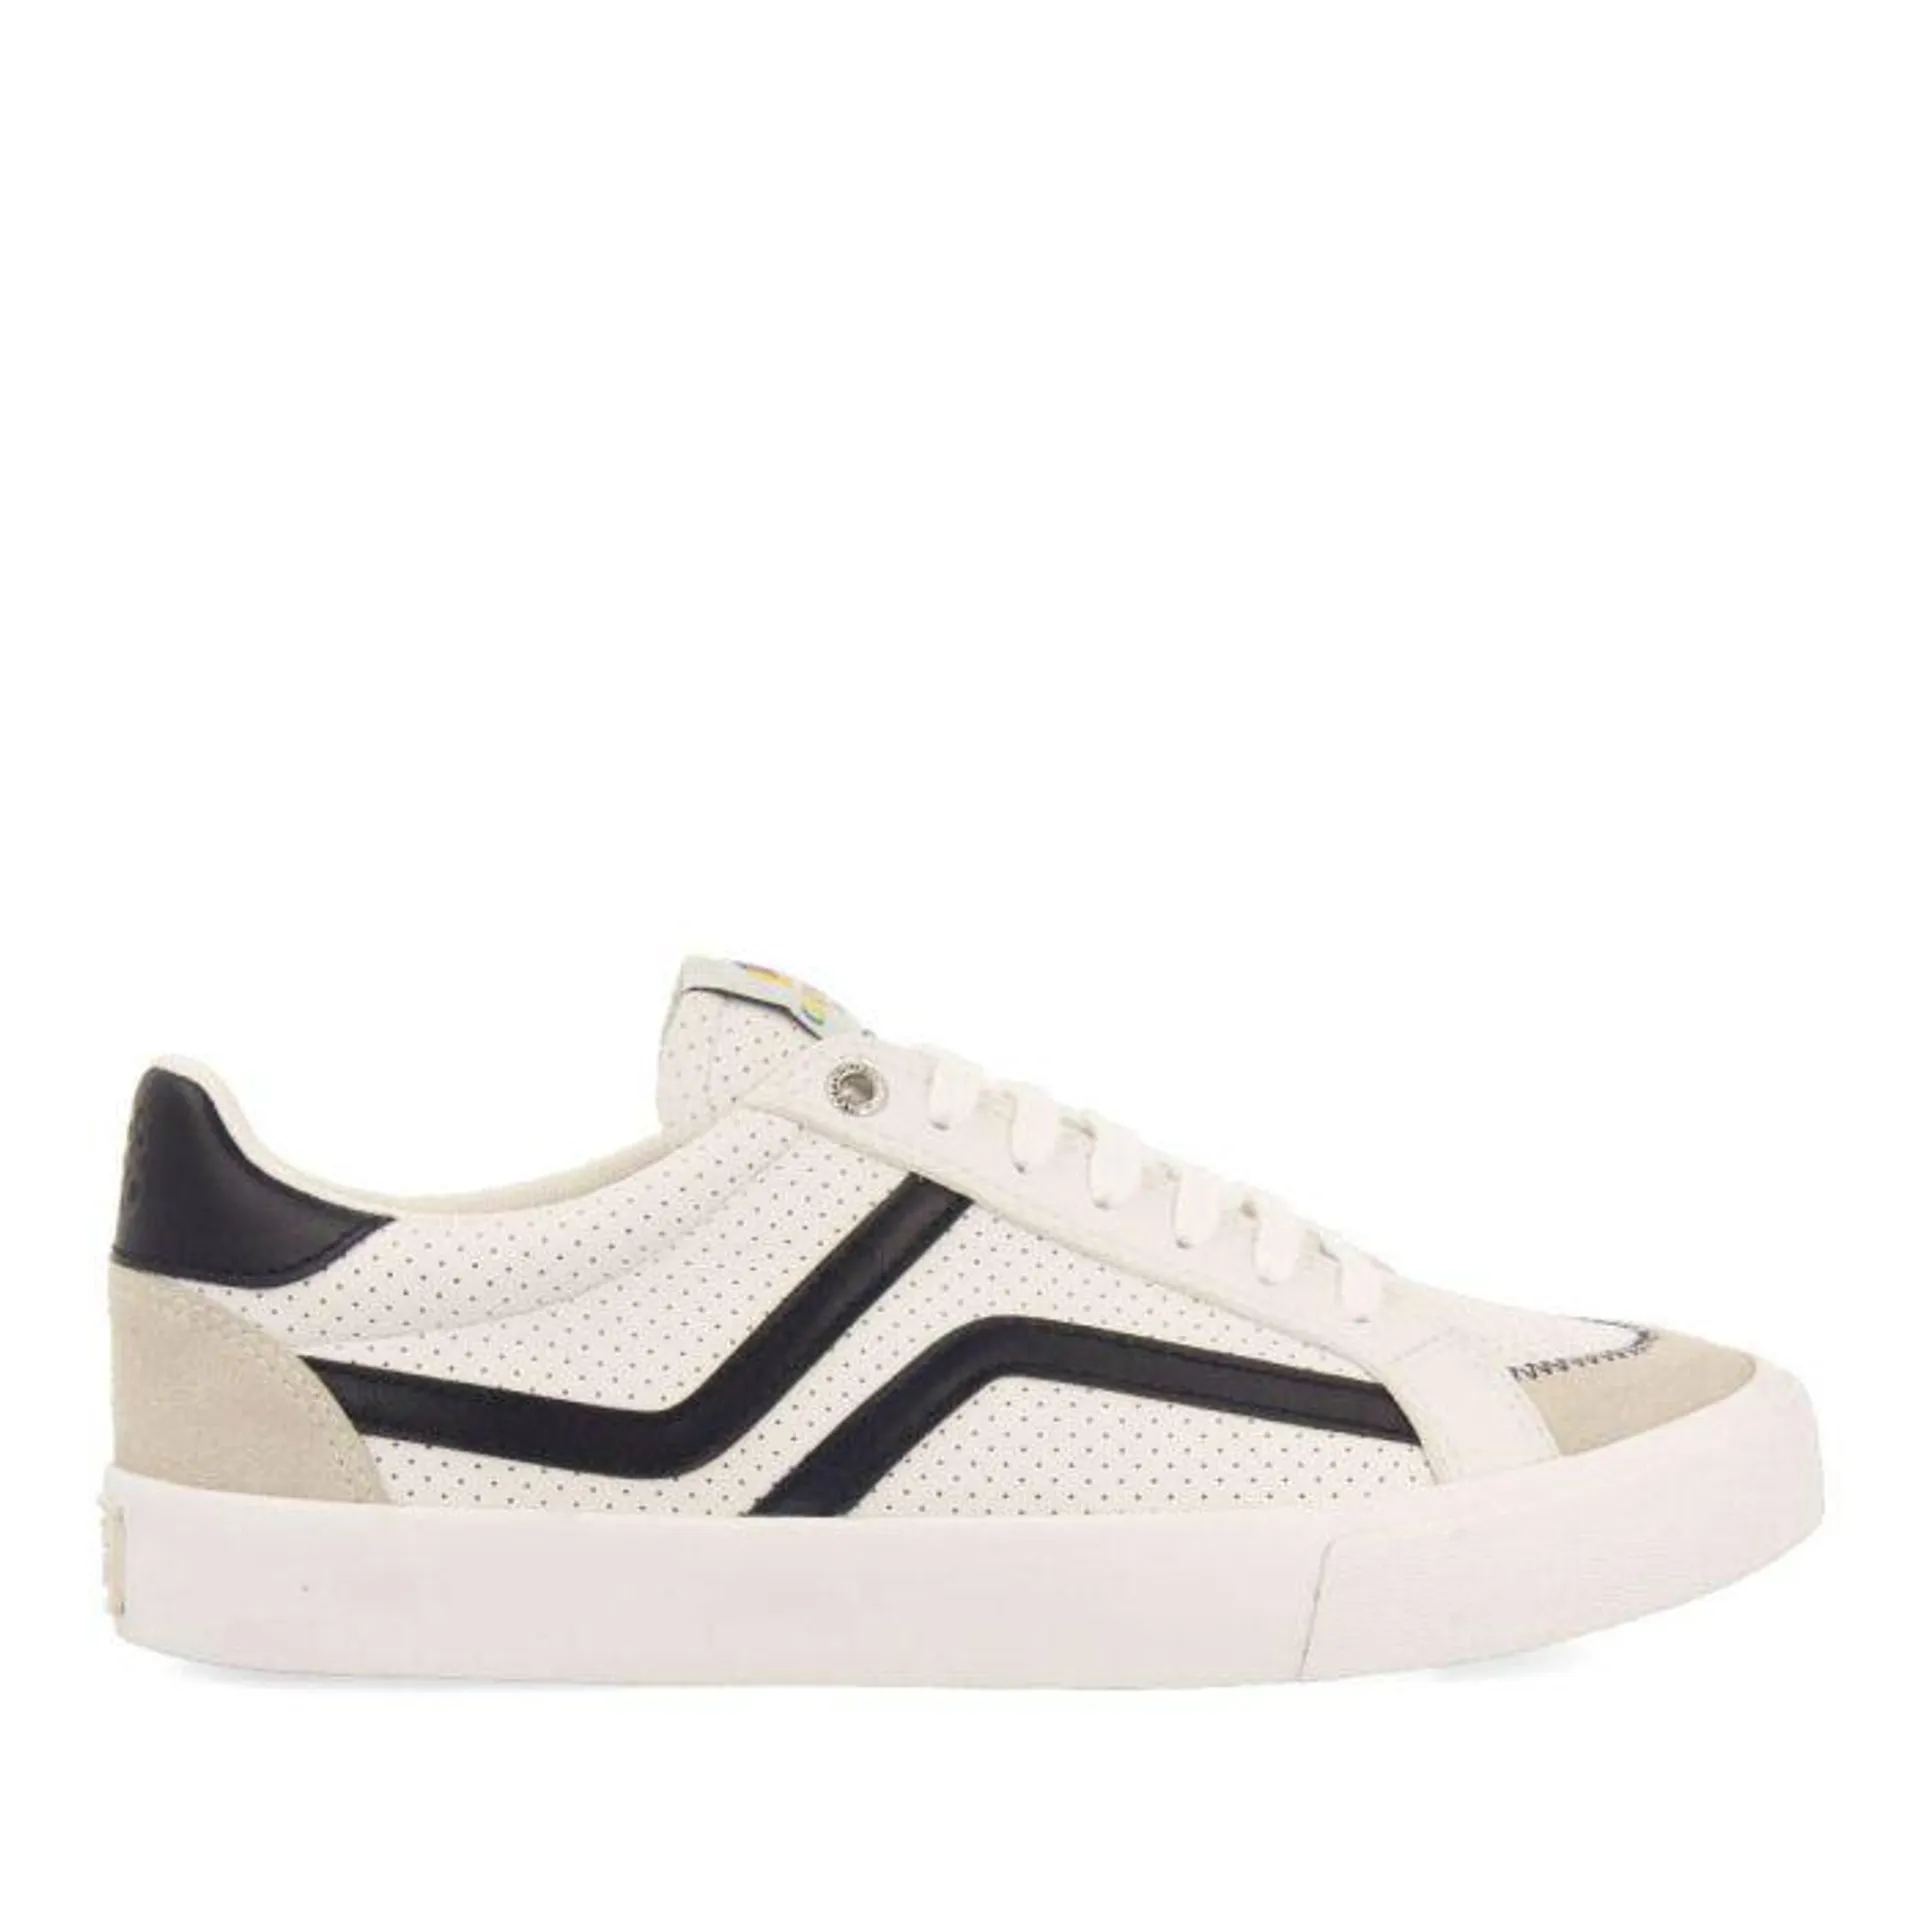 Vinneuf men's white sneakers with navy blue details